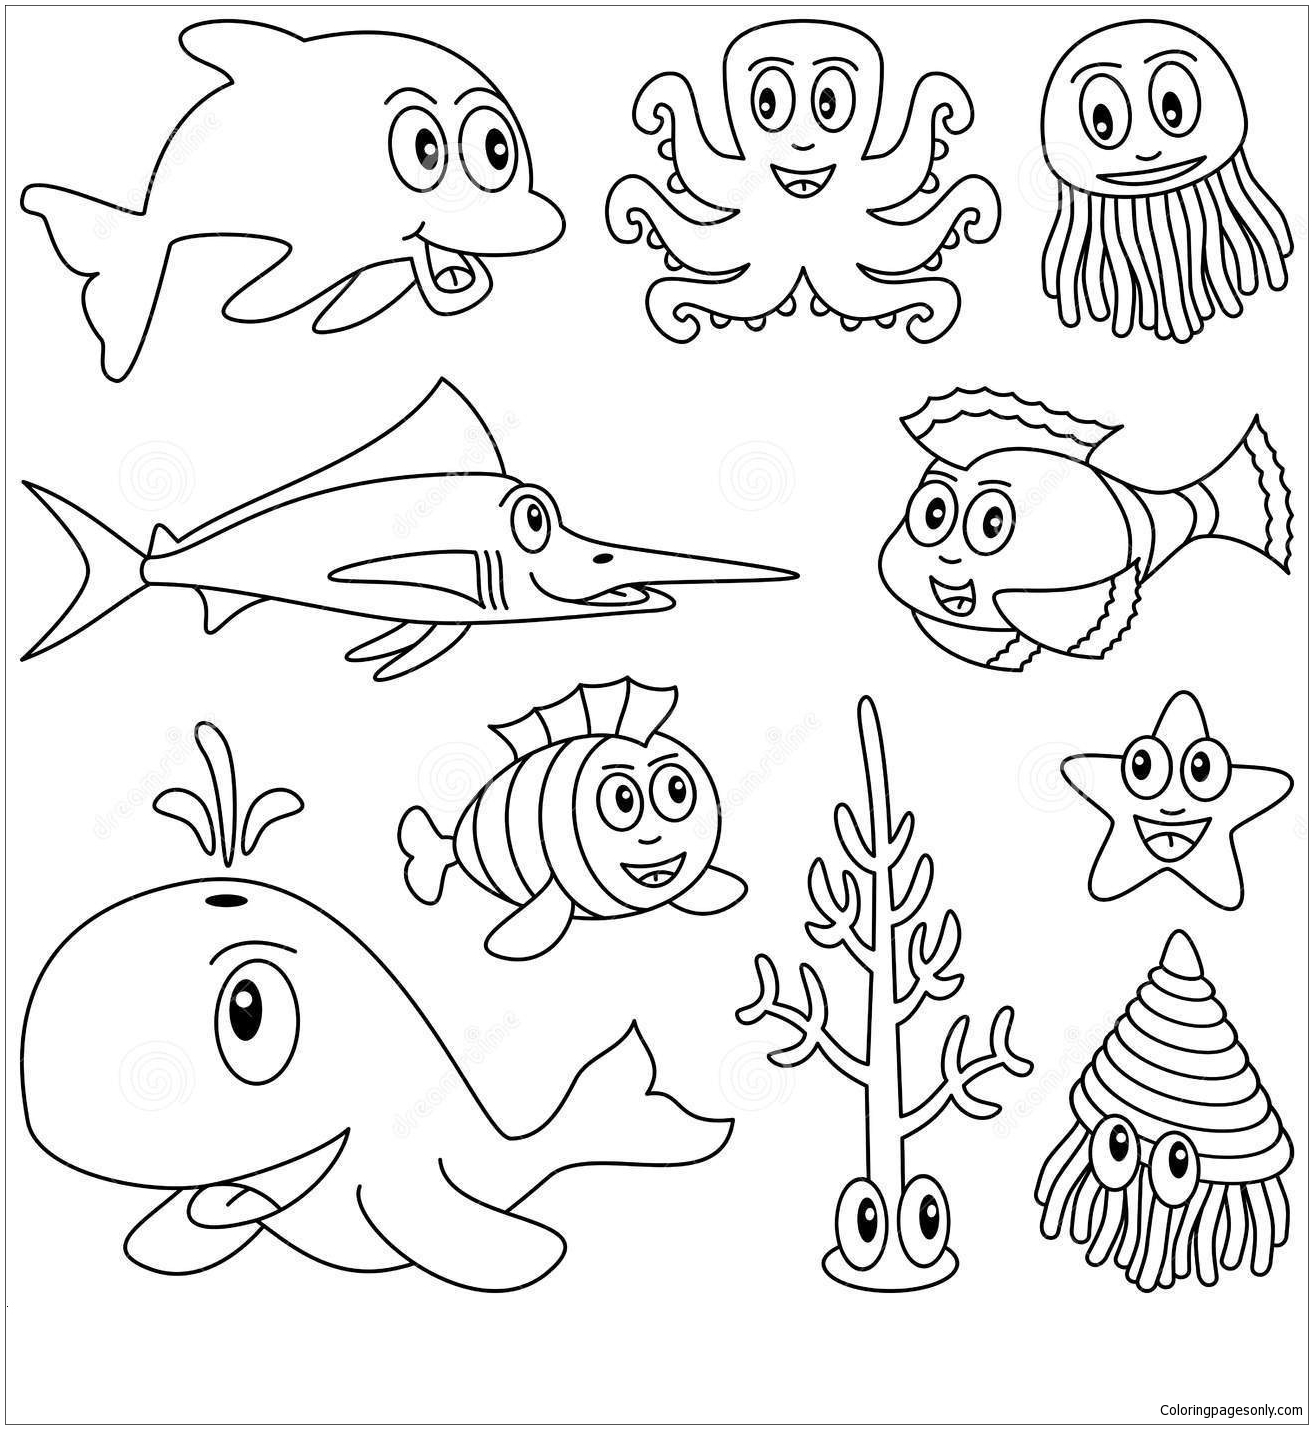 sea-animals-1-coloring-pages-seas-and-oceans-coloring-pages